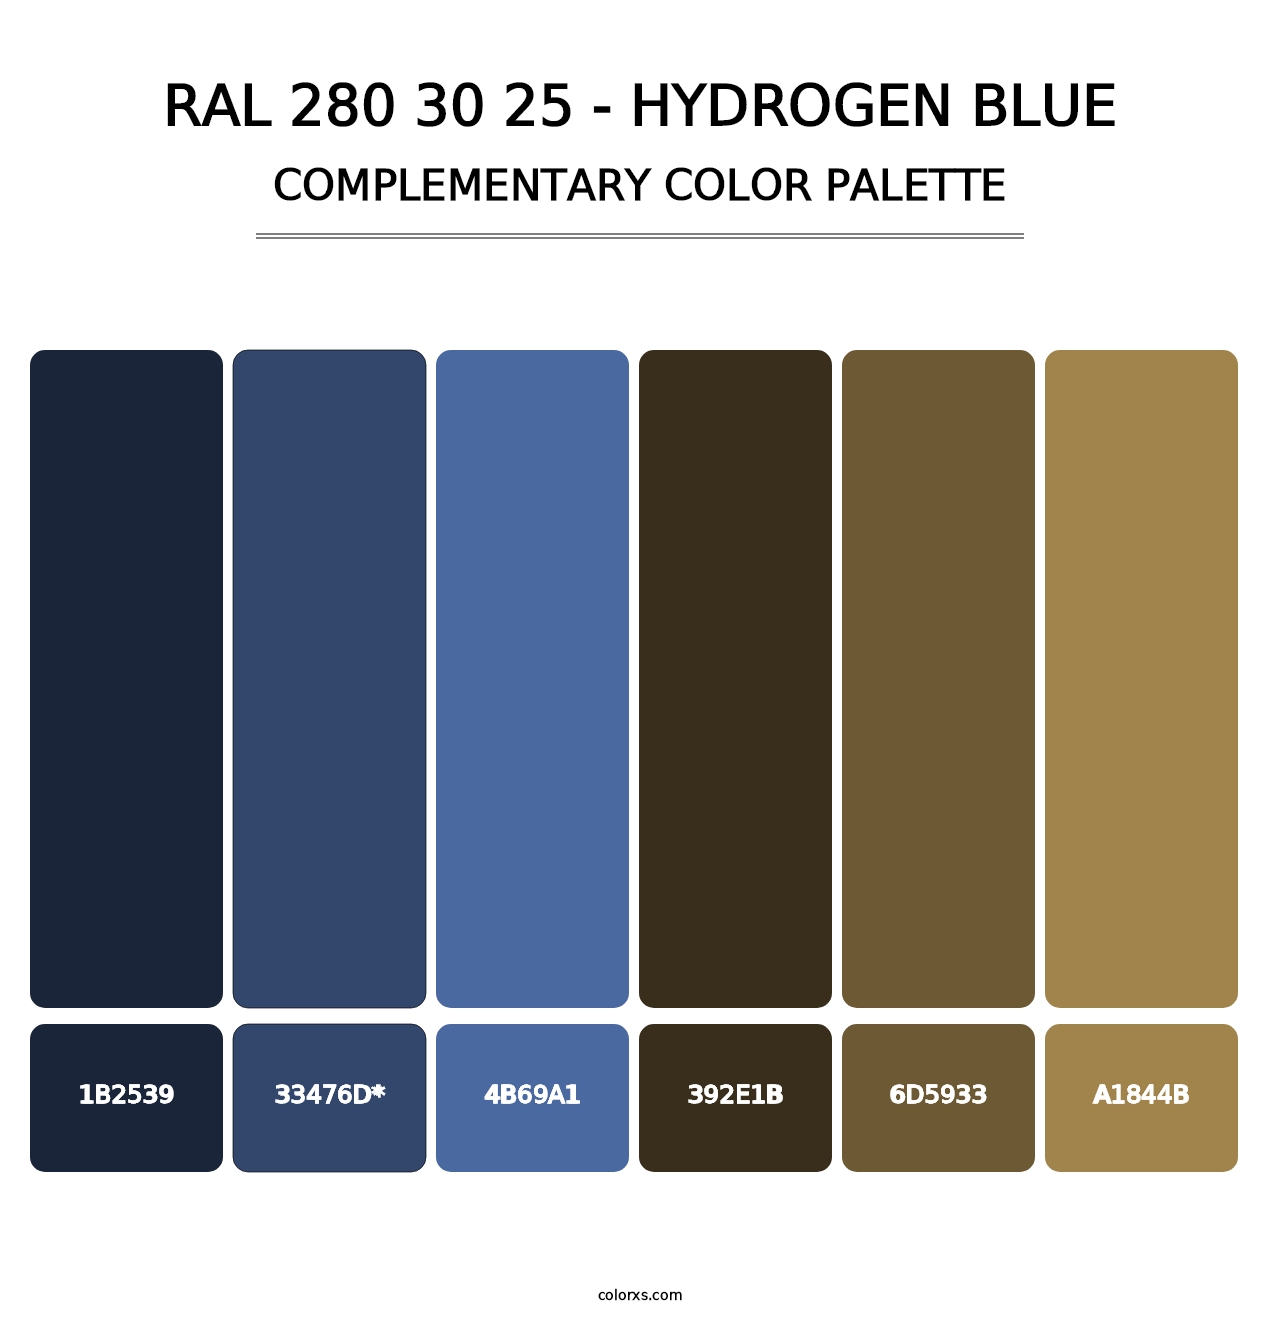 RAL 280 30 25 - Hydrogen Blue - Complementary Color Palette